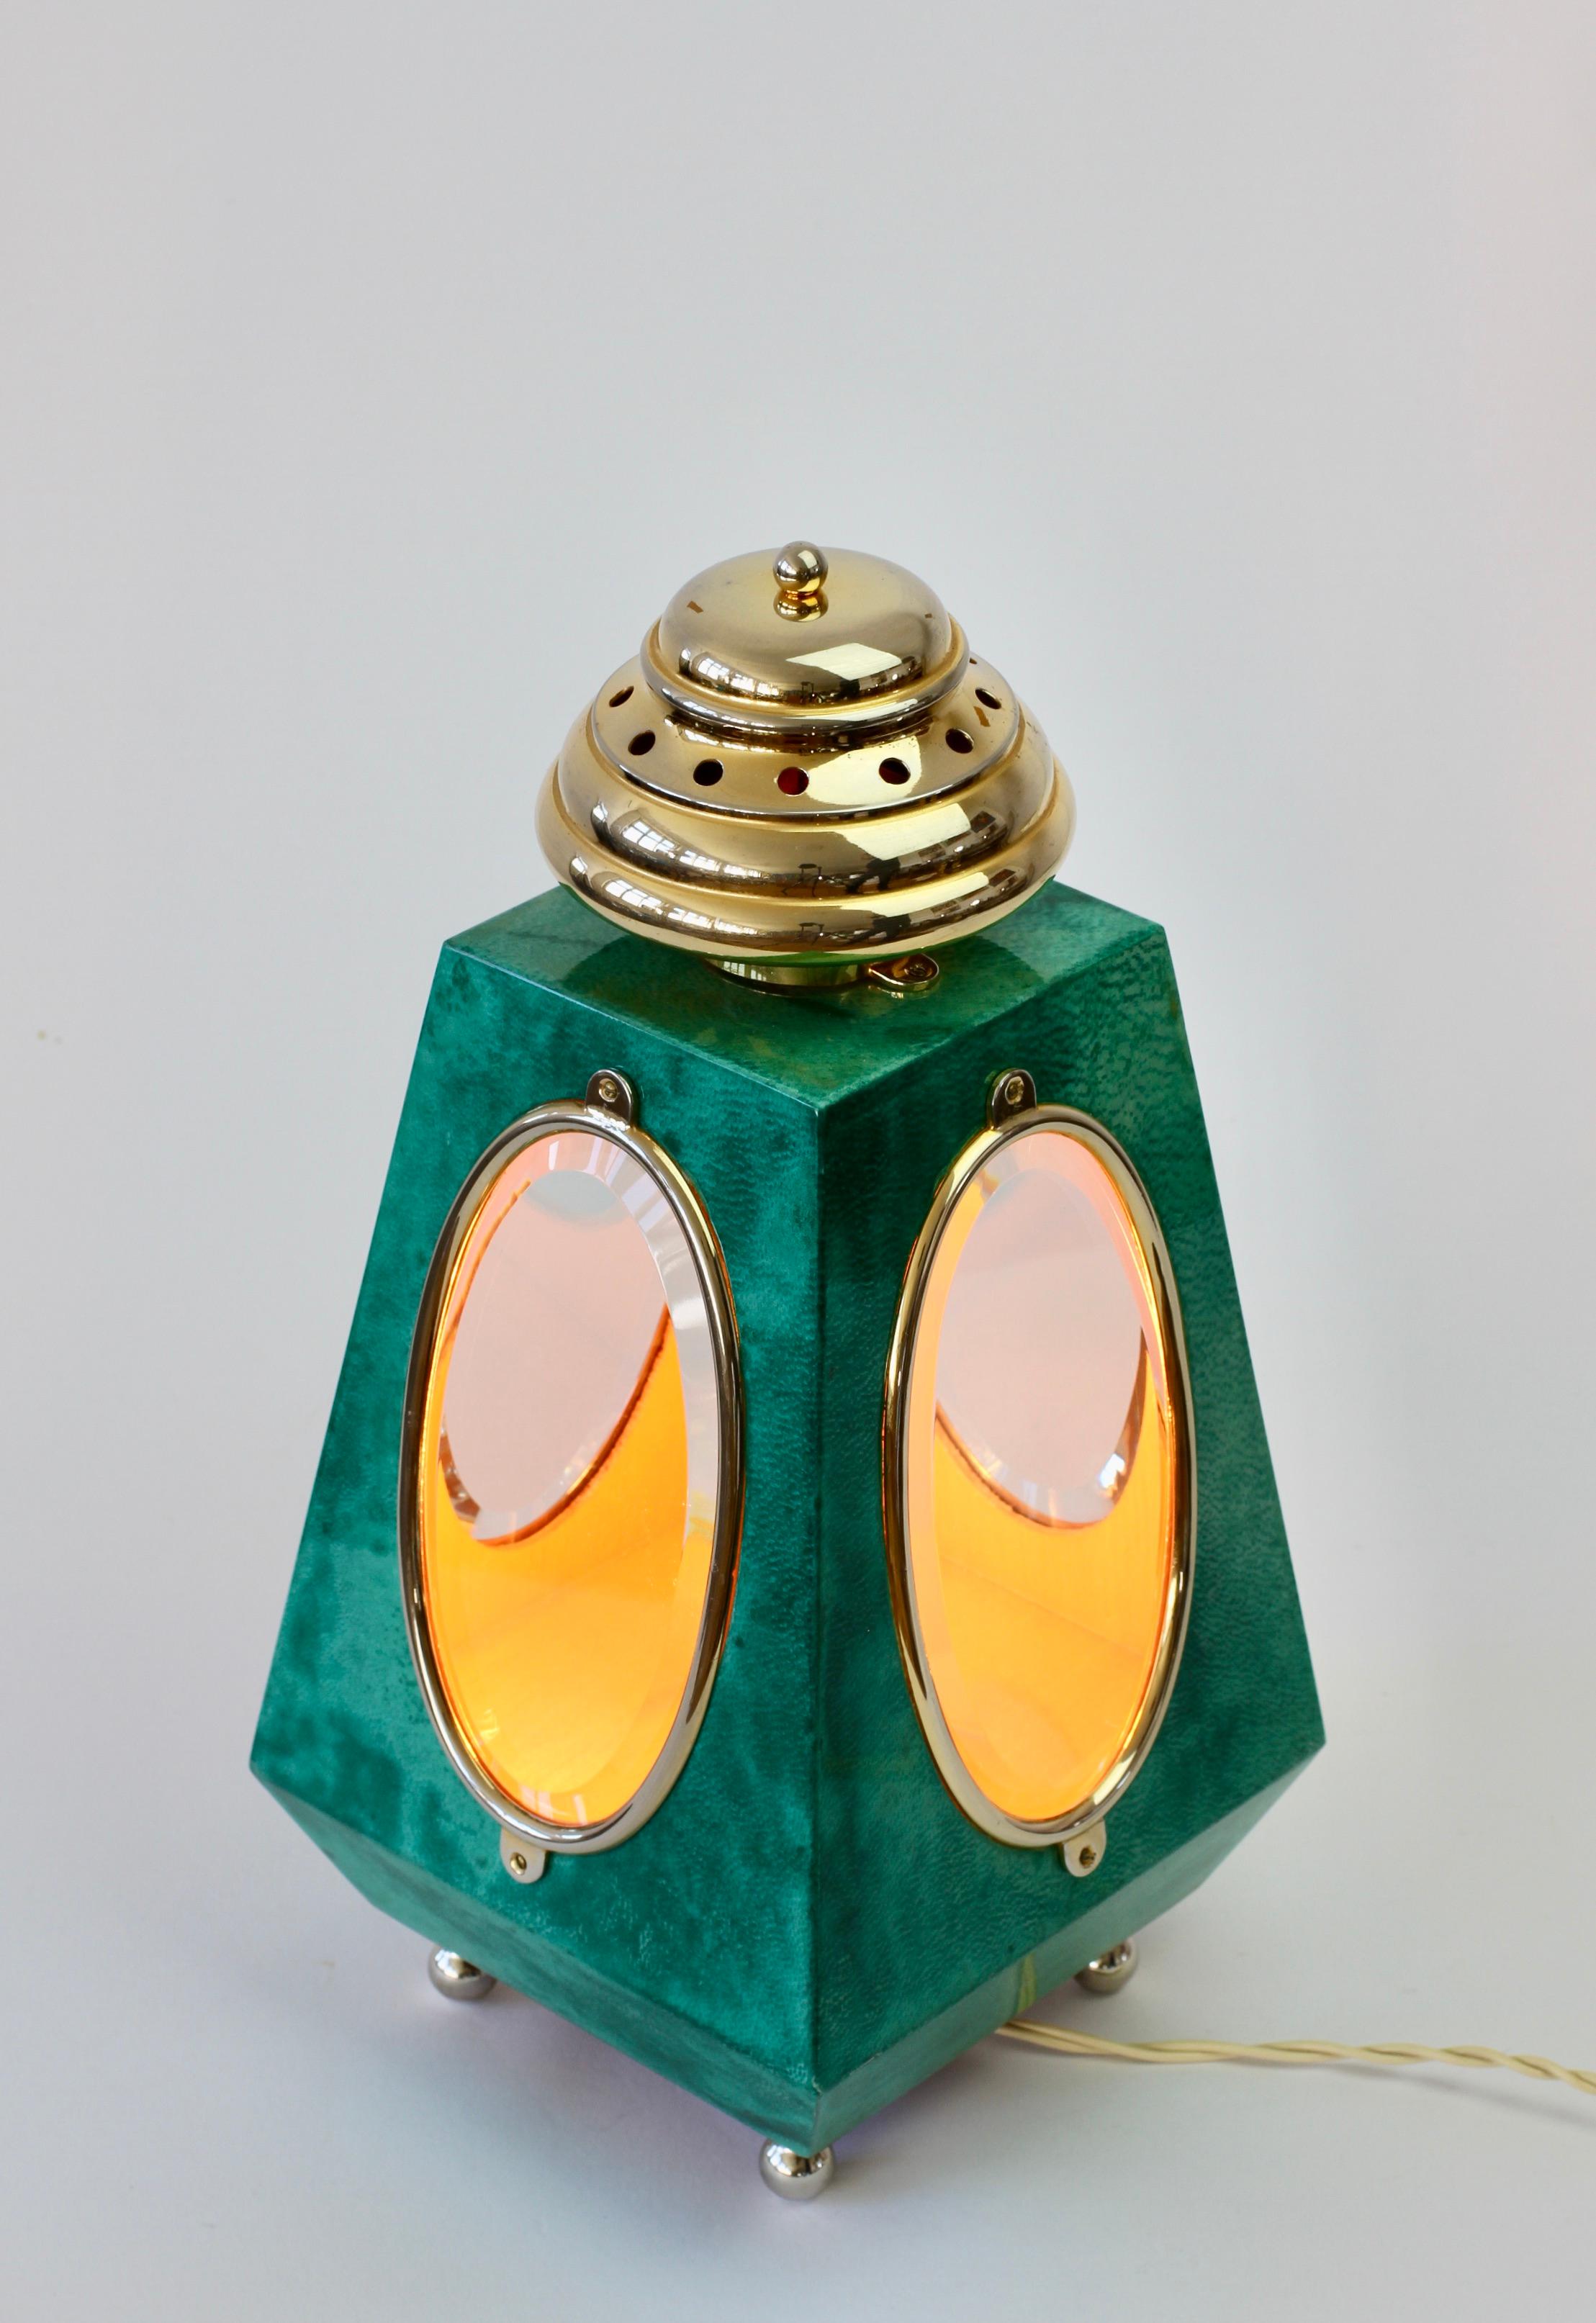 Midcentury Italian 1960s vintage lantern style table lamp attributed to Aldo Tura, Milan. The green colored and lacquered goatskin leather combined with gilded cast metal details is perfect for any midcentury or Hollywood Regency collector of